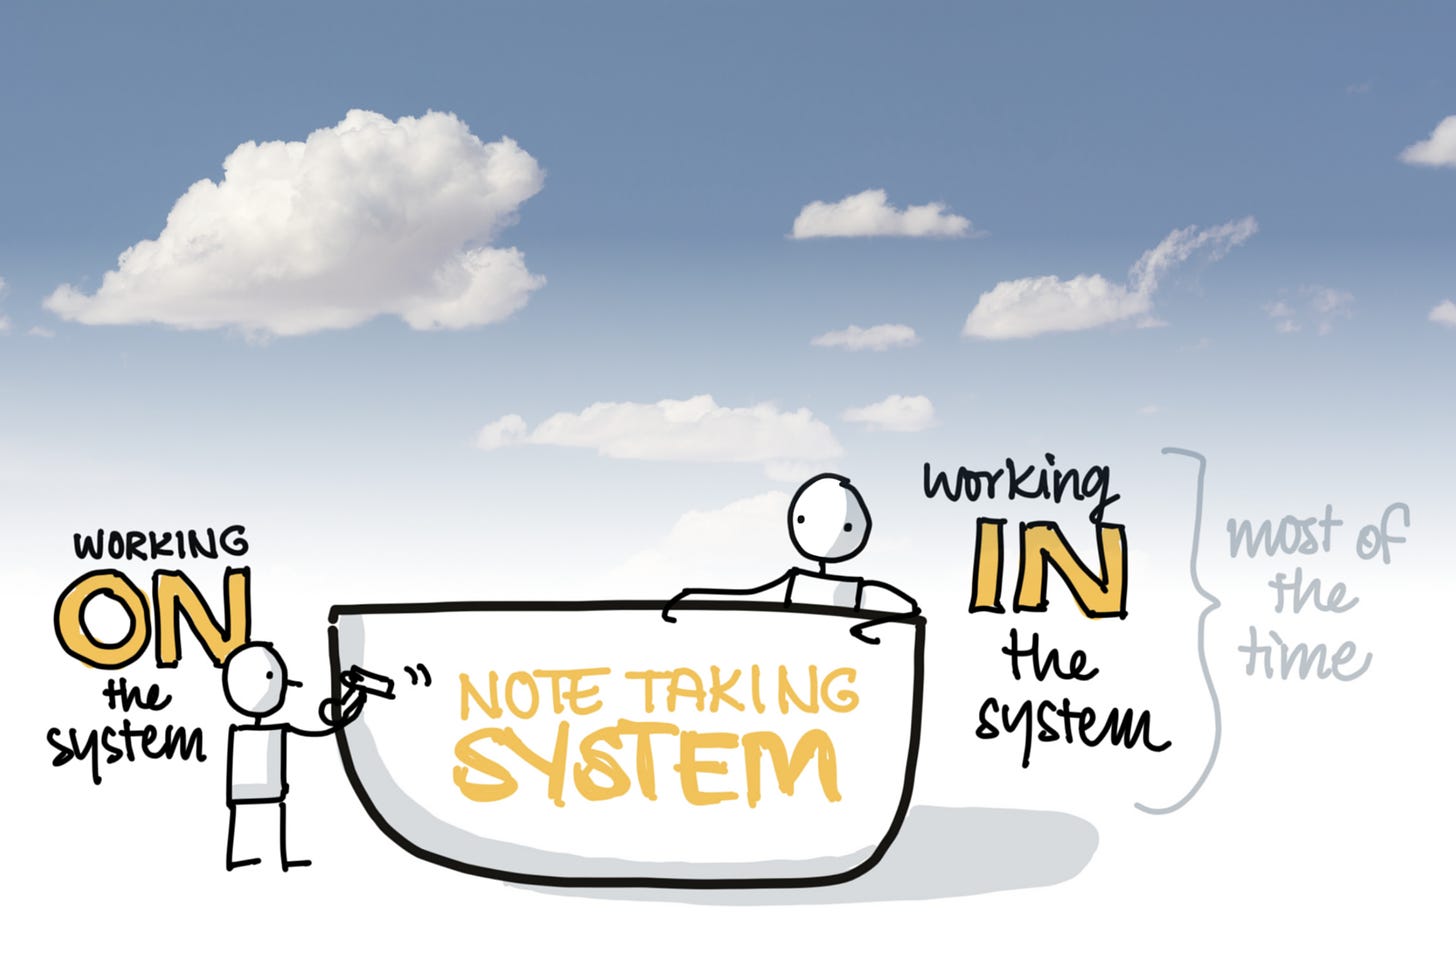 Black line sketch with deep yellow highlights, with a blue sky plus clouds in the background. One person is shown in a tub labelled “Note taking system”, while another person is working with tools on the outside of the tub. Text reads “Working ON the system” and “Working IN the system”